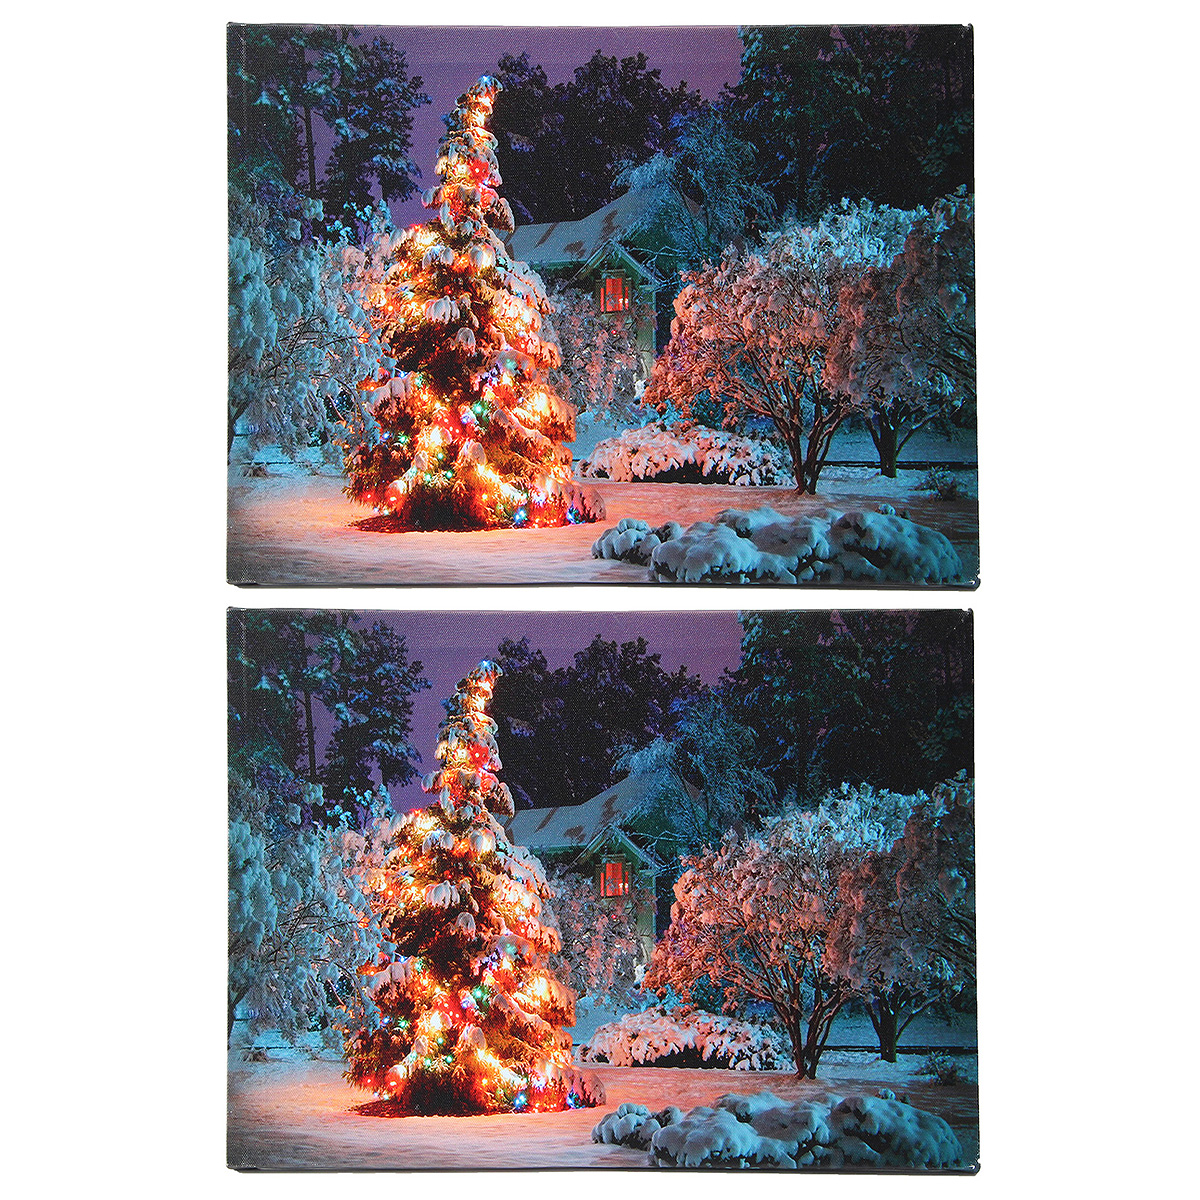 40-x-30cm-Battery-Operated-LED-Christmas-Snowy-House-Front-Tree-Xmas-Canvas-Print-Wall-Art-1109338-1